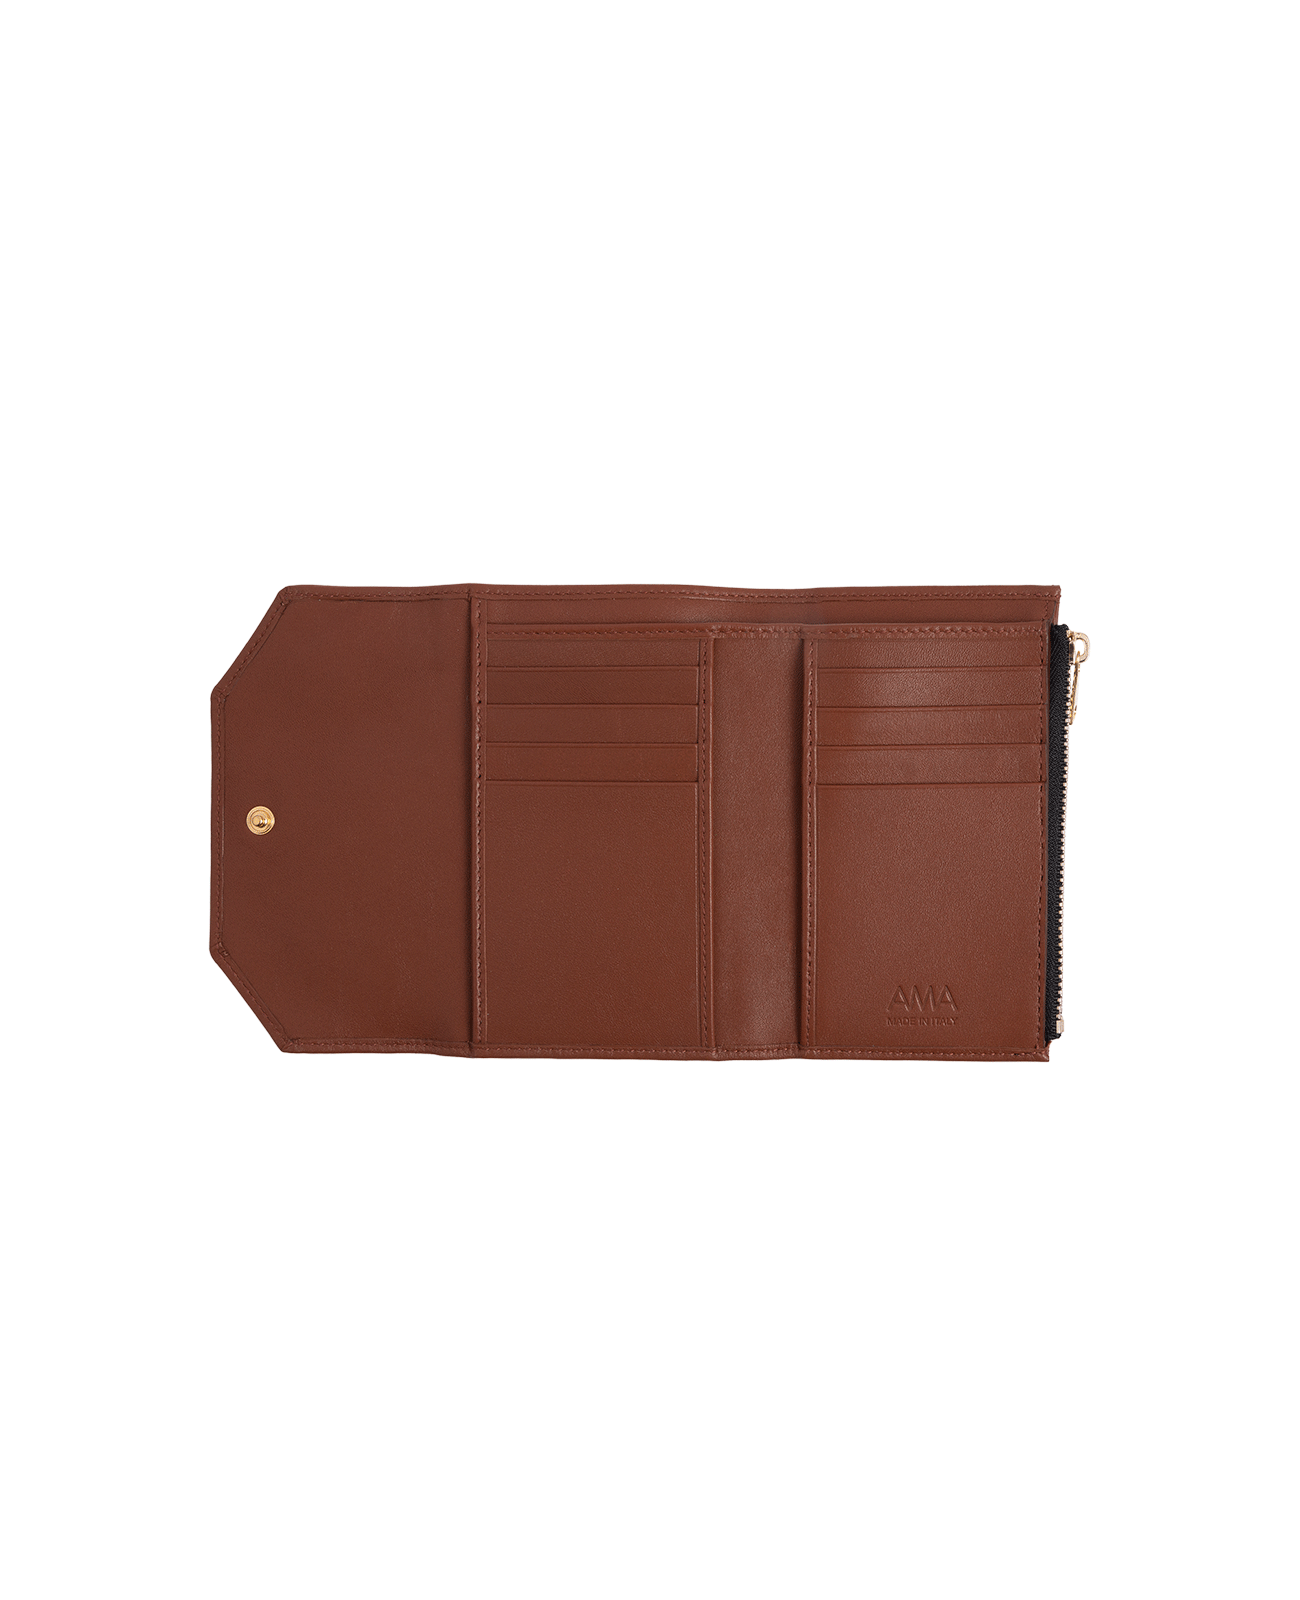 Wallet in Italian full-grain leather. Designed to carry your personal items. Available in a variety of styles and designs. Color: Mocha. Size: Mini